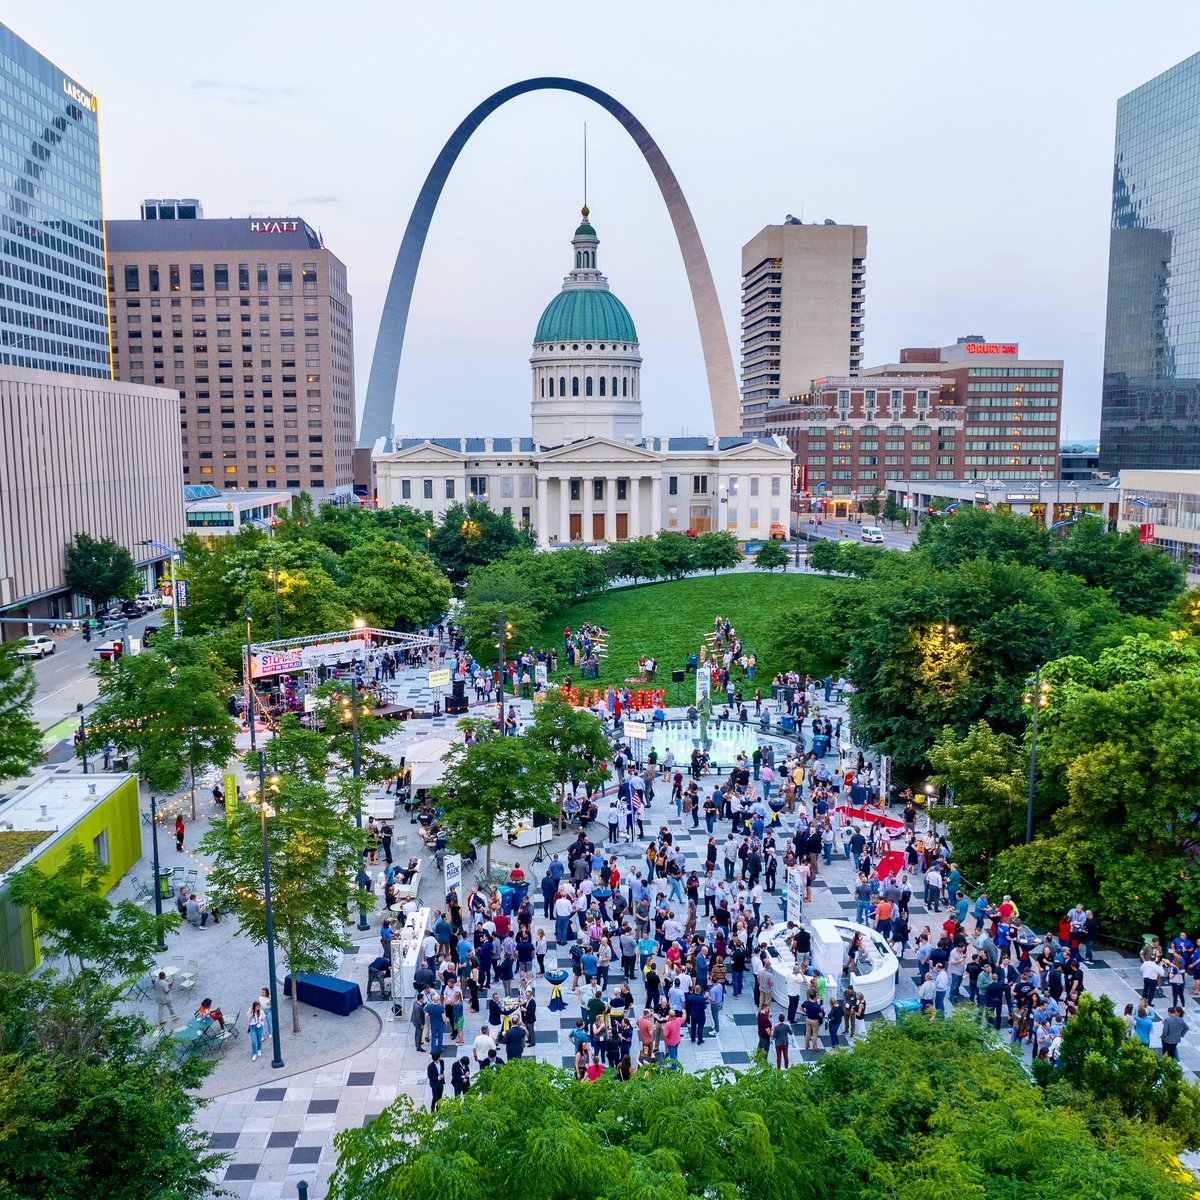 Yesterday evening, #GEOINT2023 hosted the #stlmade Party in the Plaza as it concludes its week here in St. Louis!

📸 23 MAY 2023